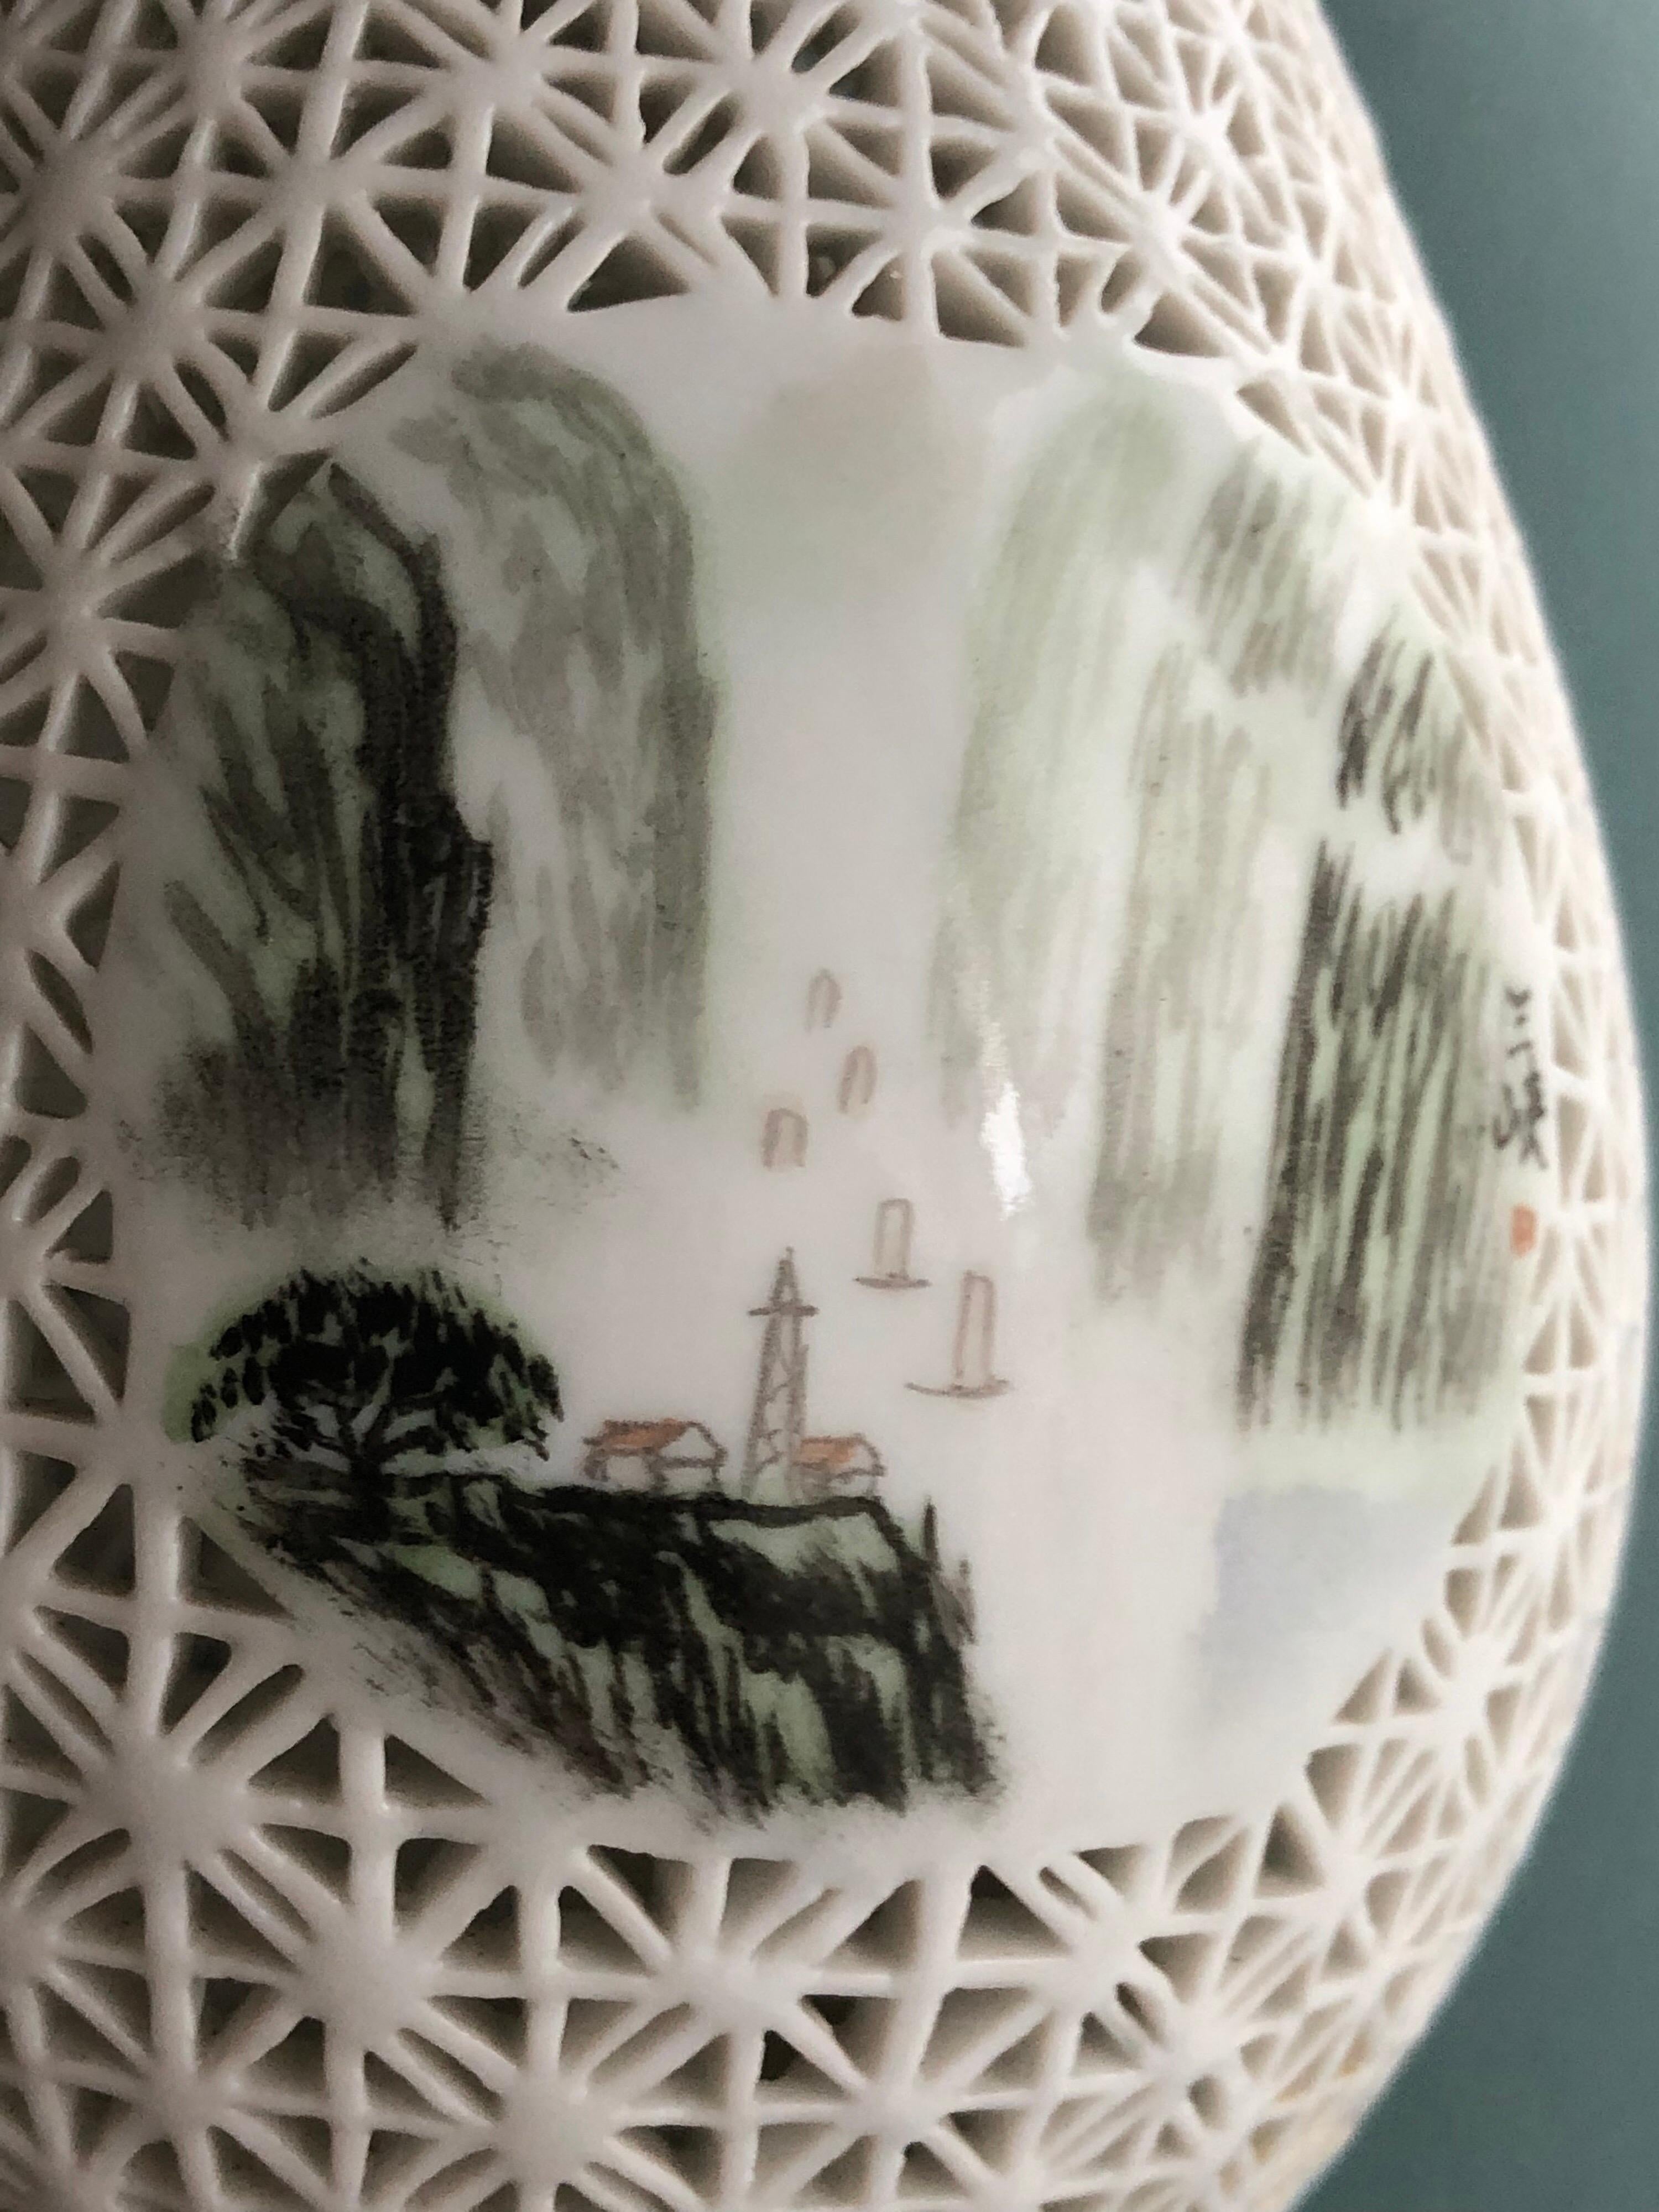 Small hand painted vintage Chinese vase
Complimentary shipping included worldwide.